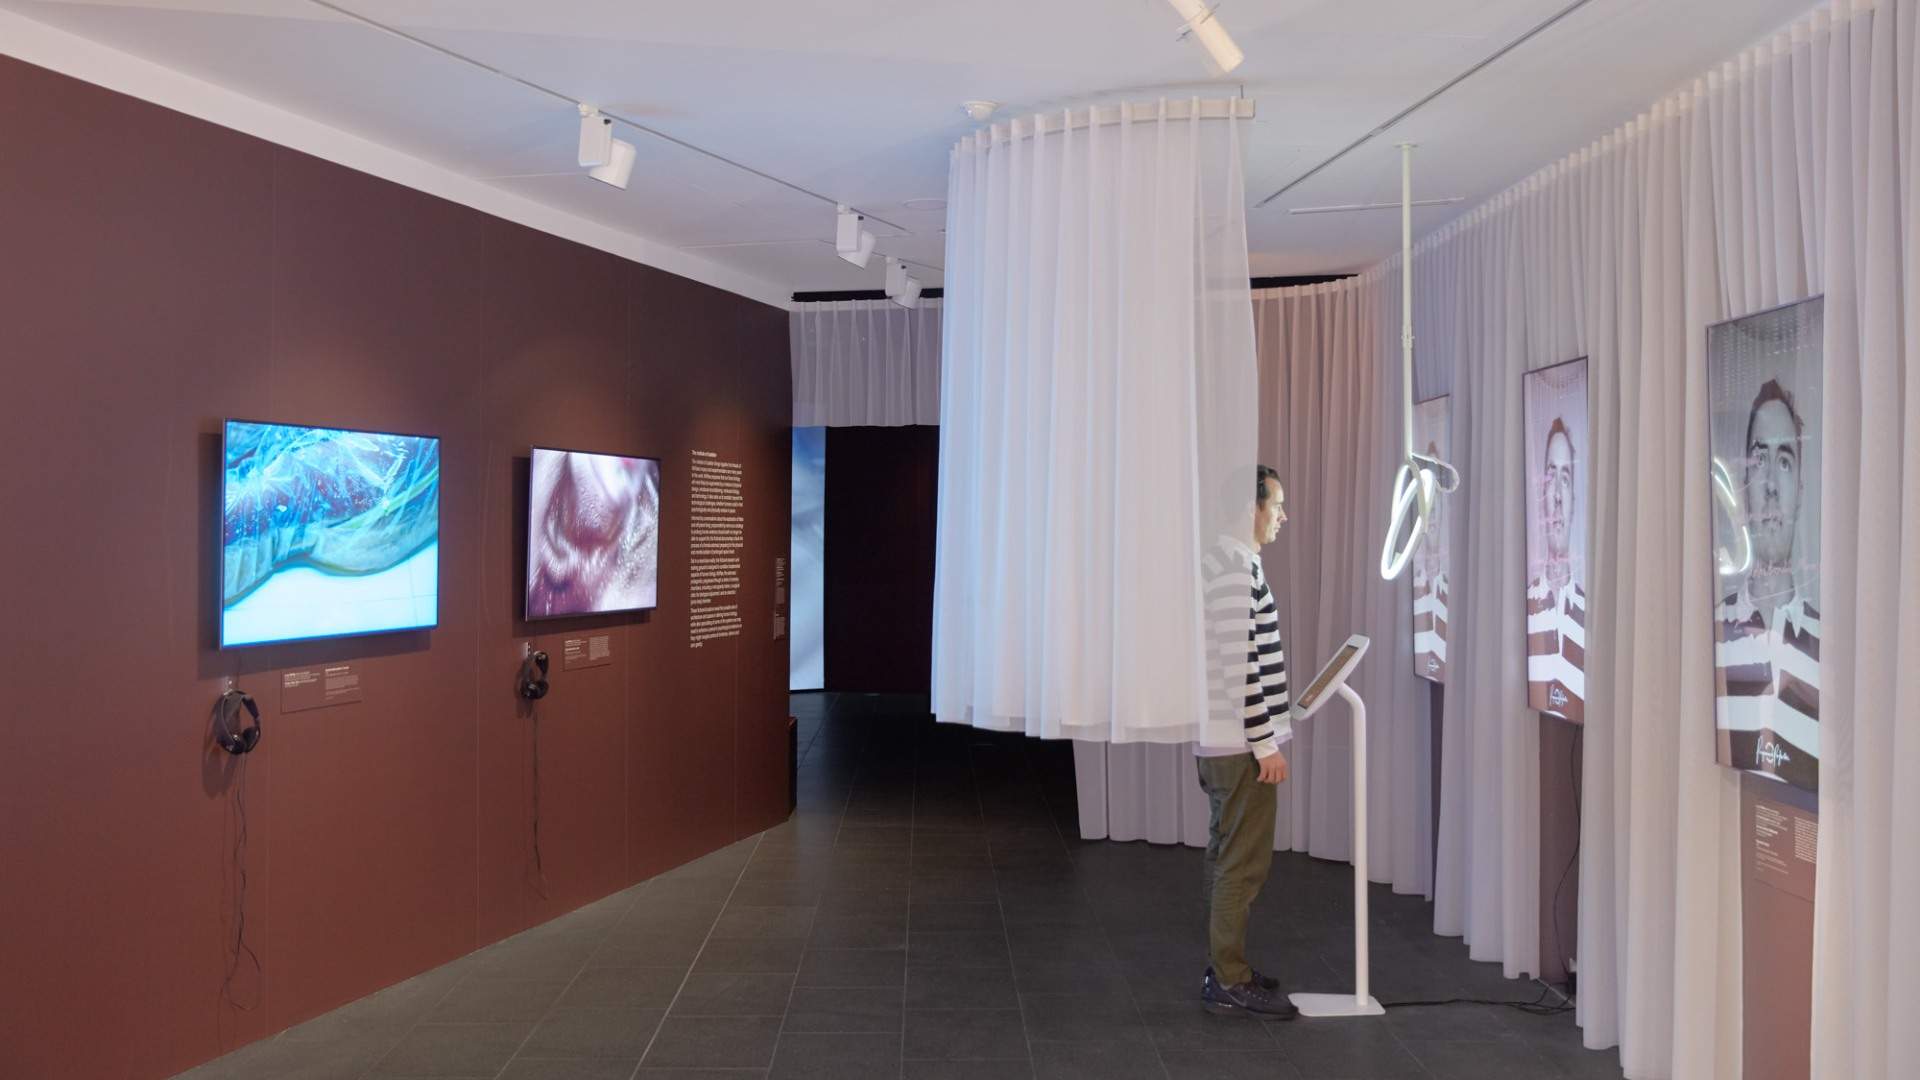 The NGV's Futuristic New Exhibition Explores the Human Body Through High-Tech Installations